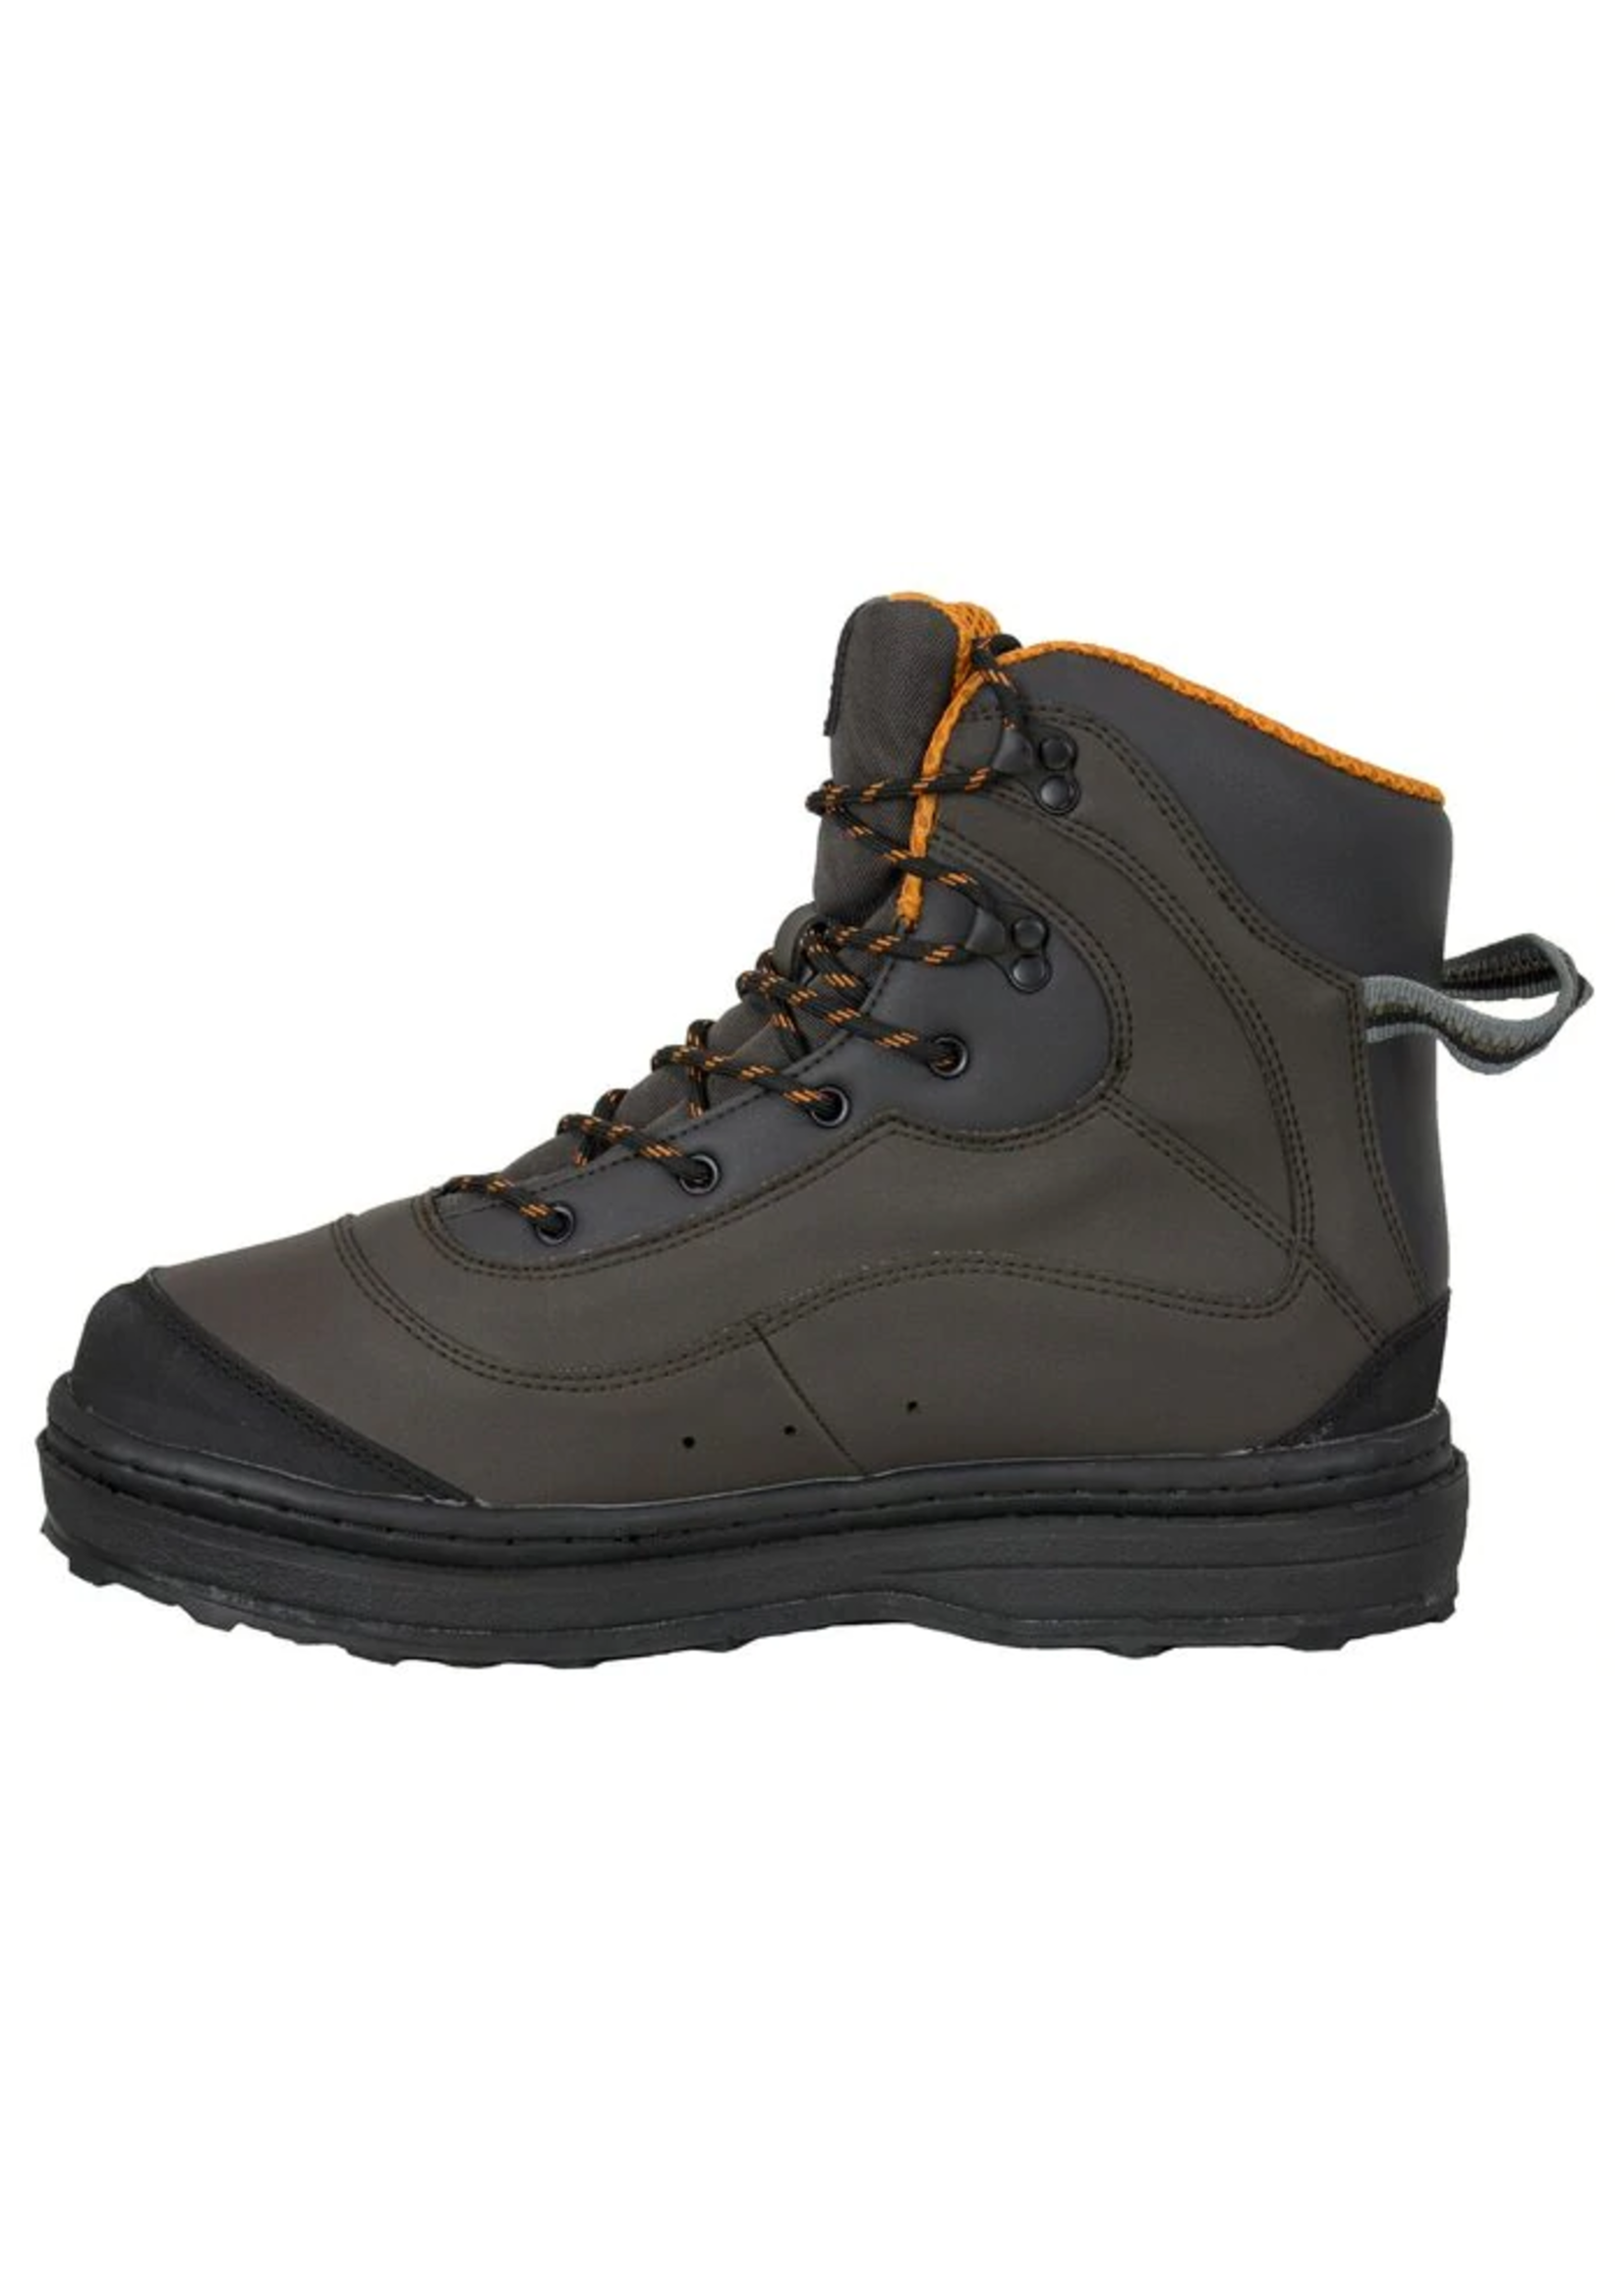 Compass 360 Compass 360 Tailwater II Cleated Sole Wading Boots